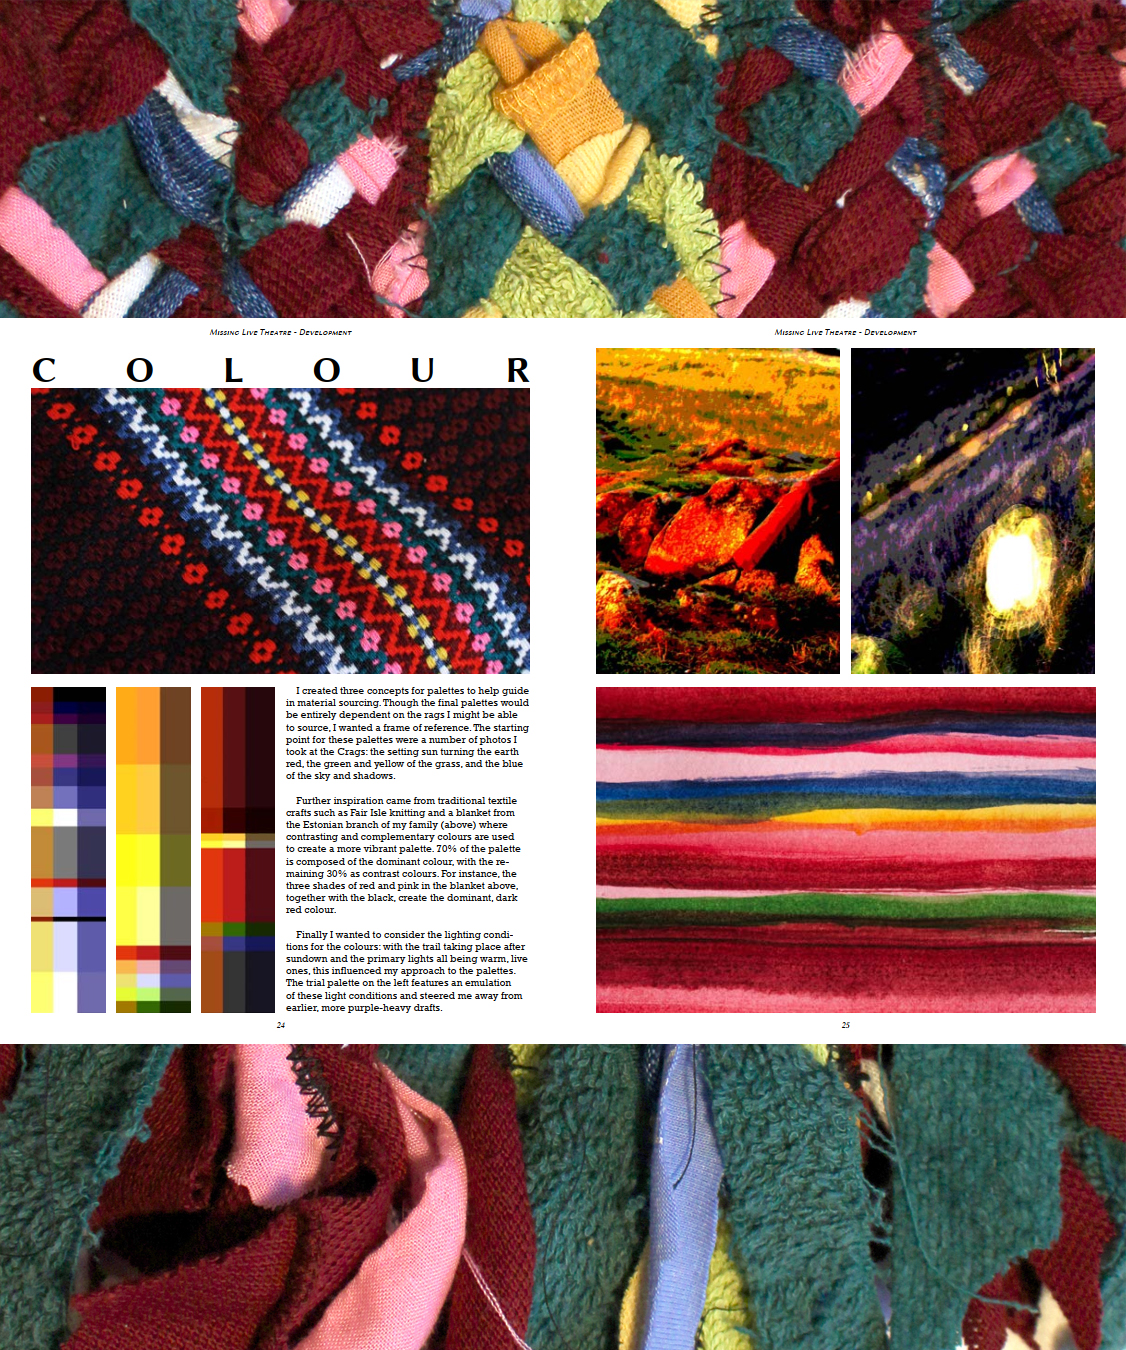 A spread from a costume book placed ontop of a photo of a fabric sample. The sample is several seven-strand braids, made out of colourful rags, sewn together in breadth. The spread is titled colour and features text and pictures, such as colour maps and manipulated photos.